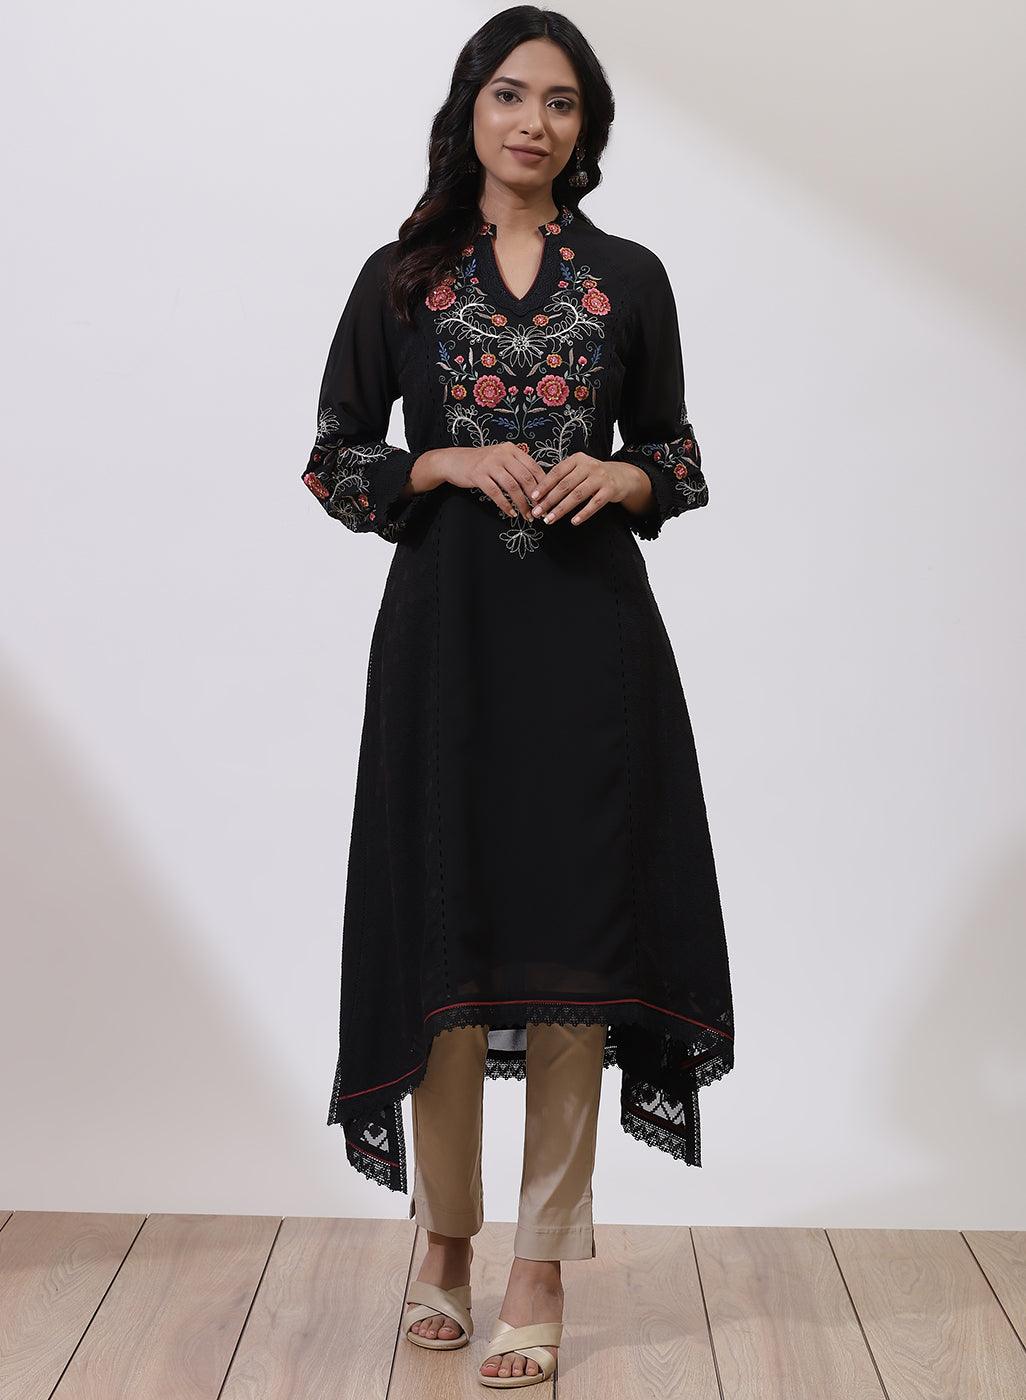 HOW TO STYLE A BLACK KURTI IN 20 DIFFERENT WAYS! - Baggout